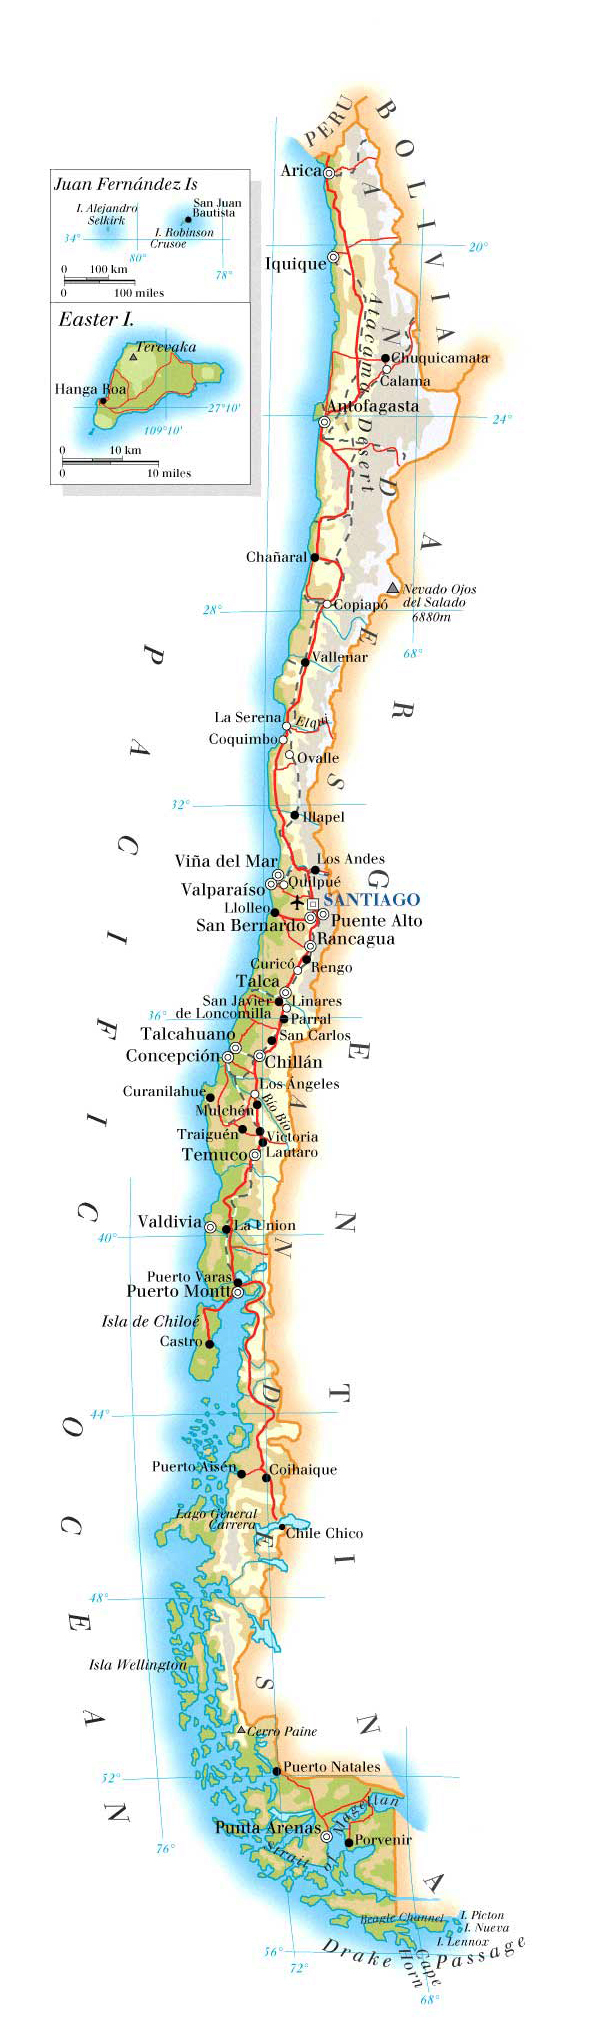 Image result for chile cities map